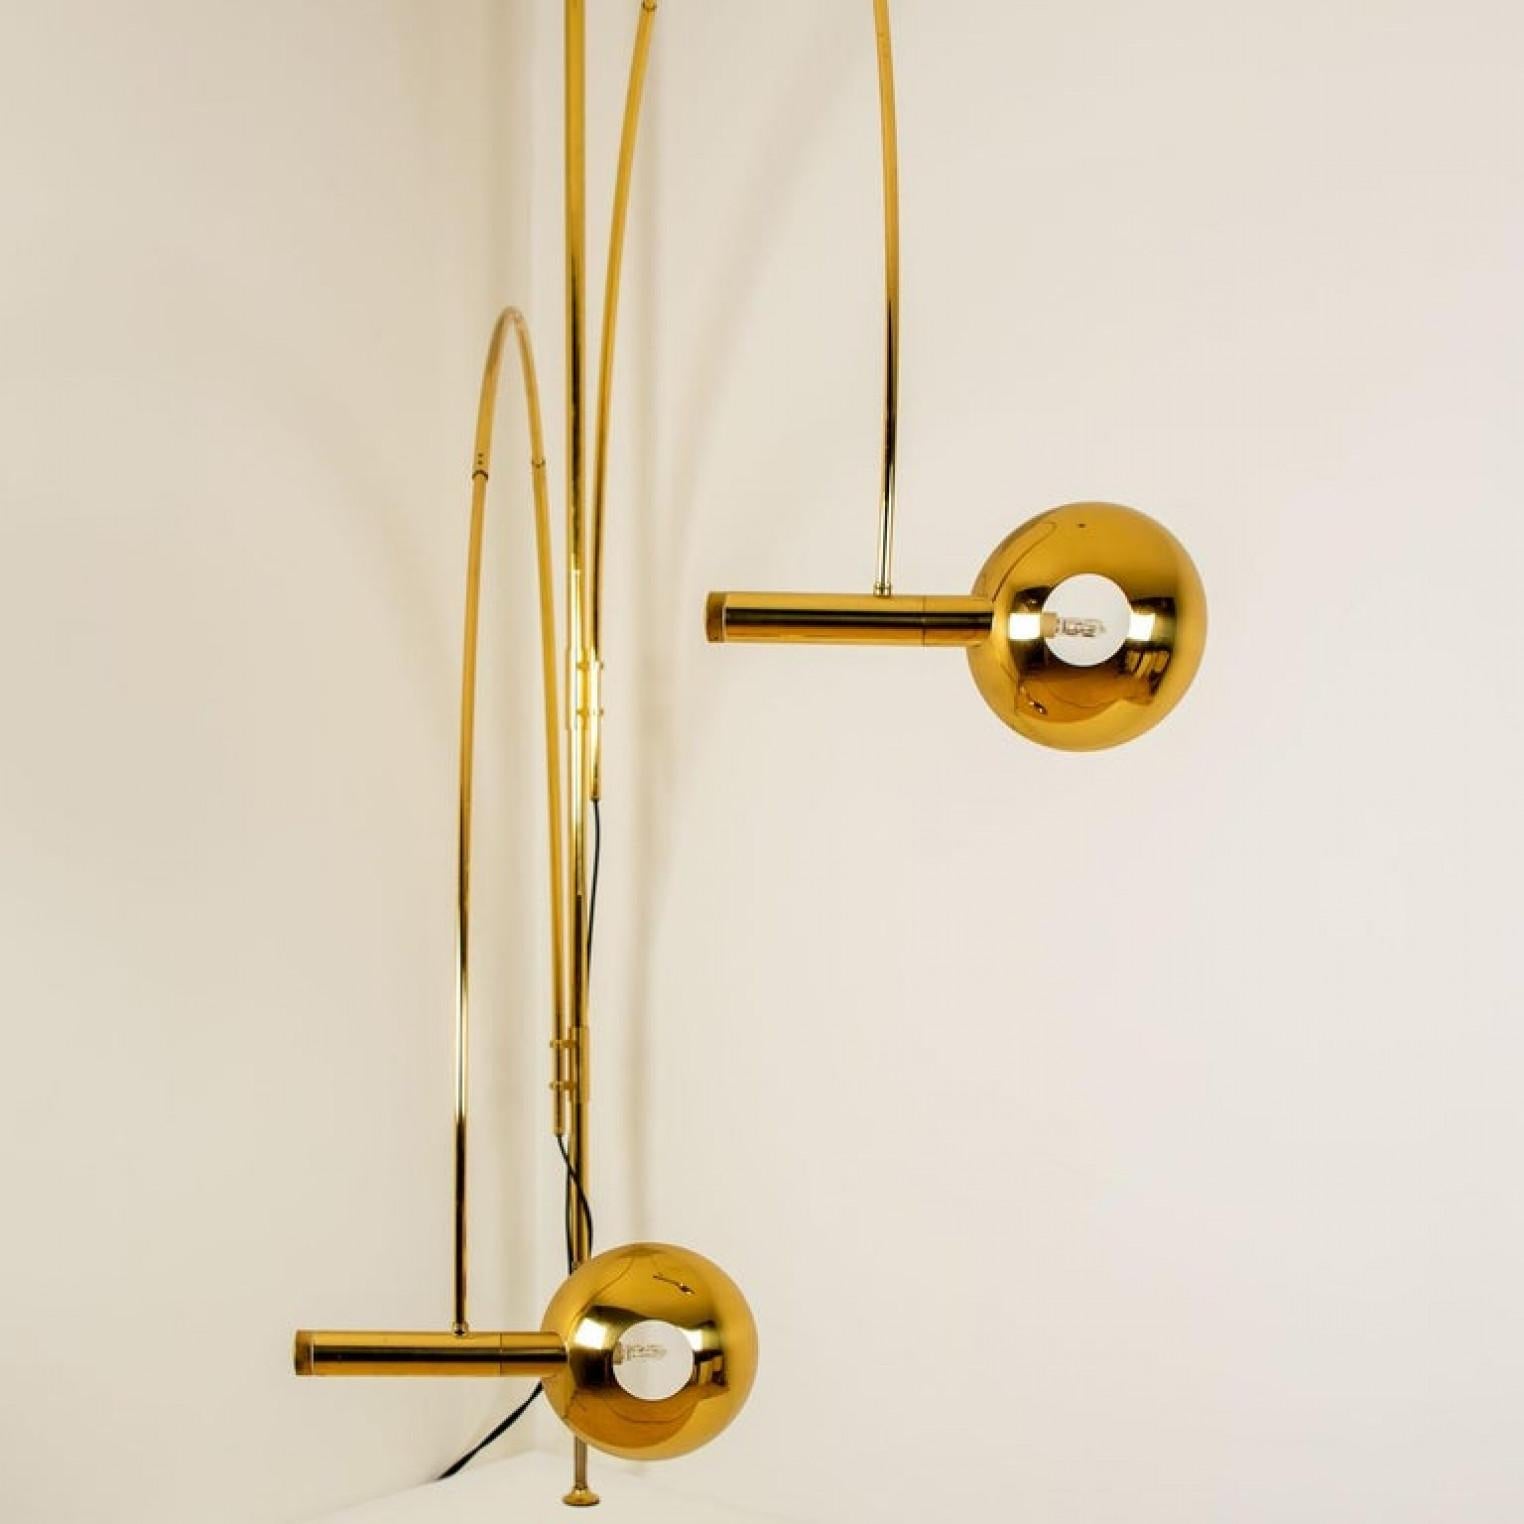 Late 20th Century Florian Schulz Double Ball Brass Arc Floor Lamp, Height Adjustable, 1970 For Sale